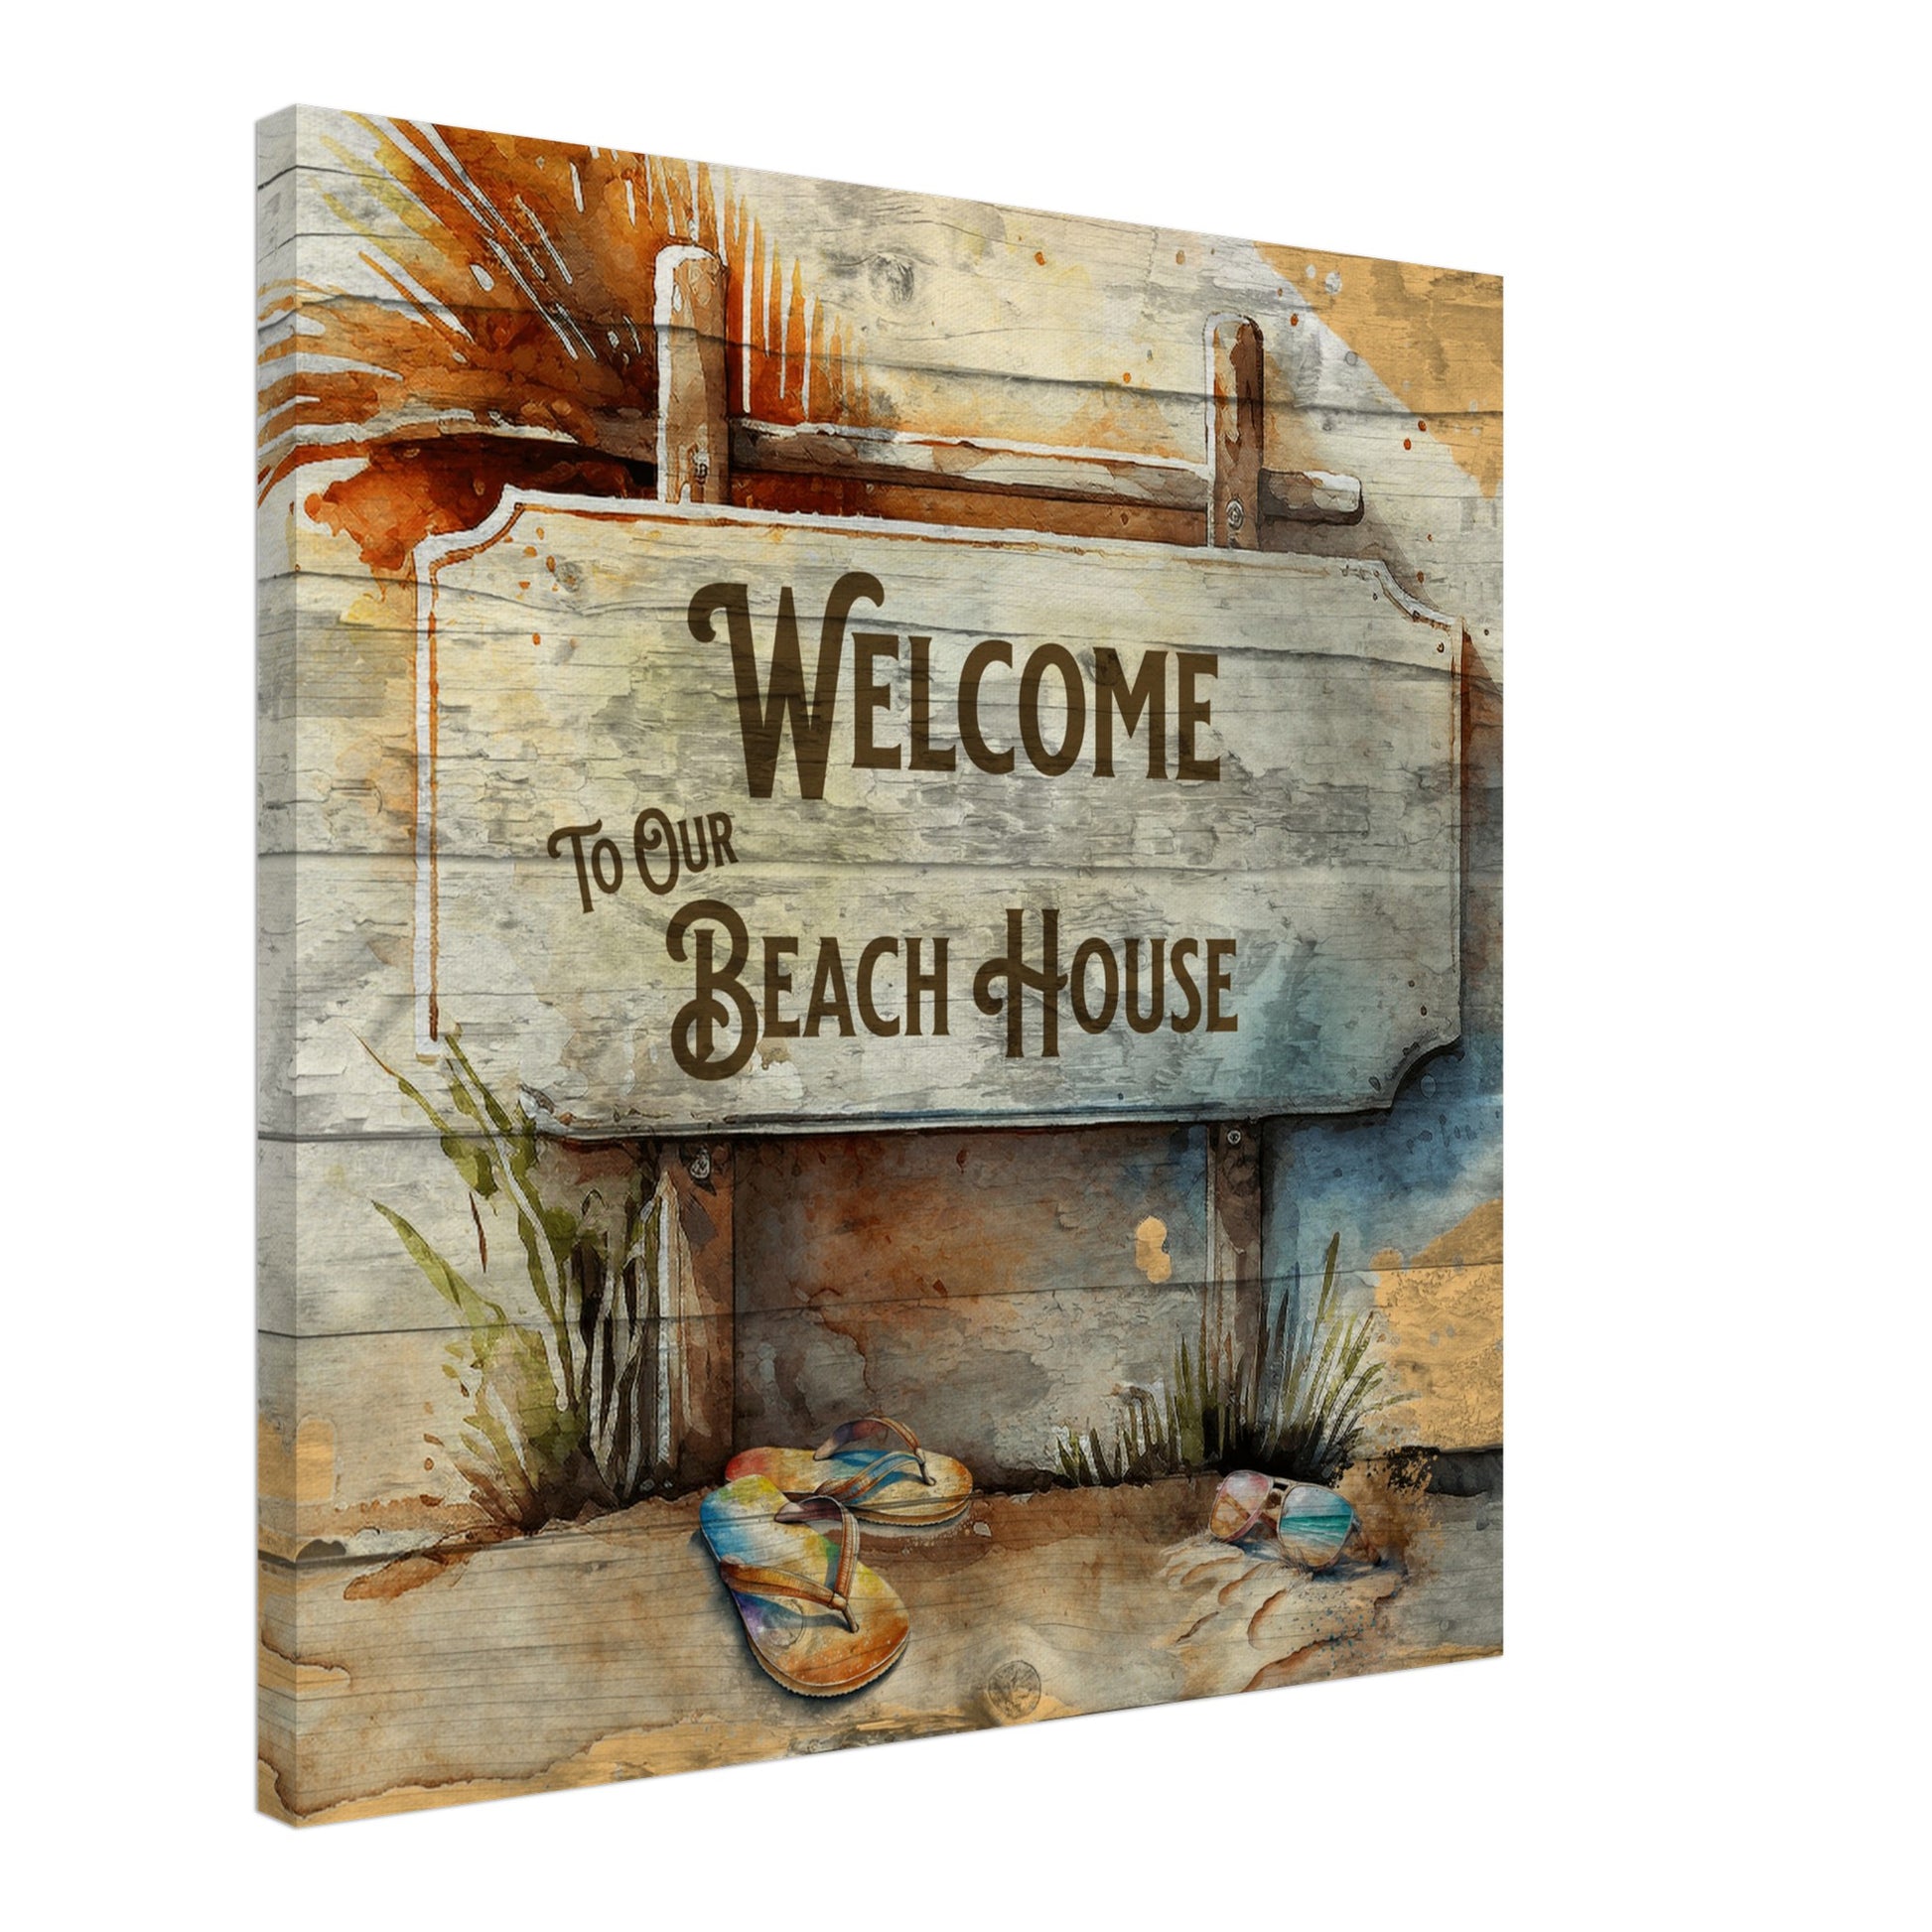 Welcome To Our Beach House Canvas Wall Print -Caribbean Rays